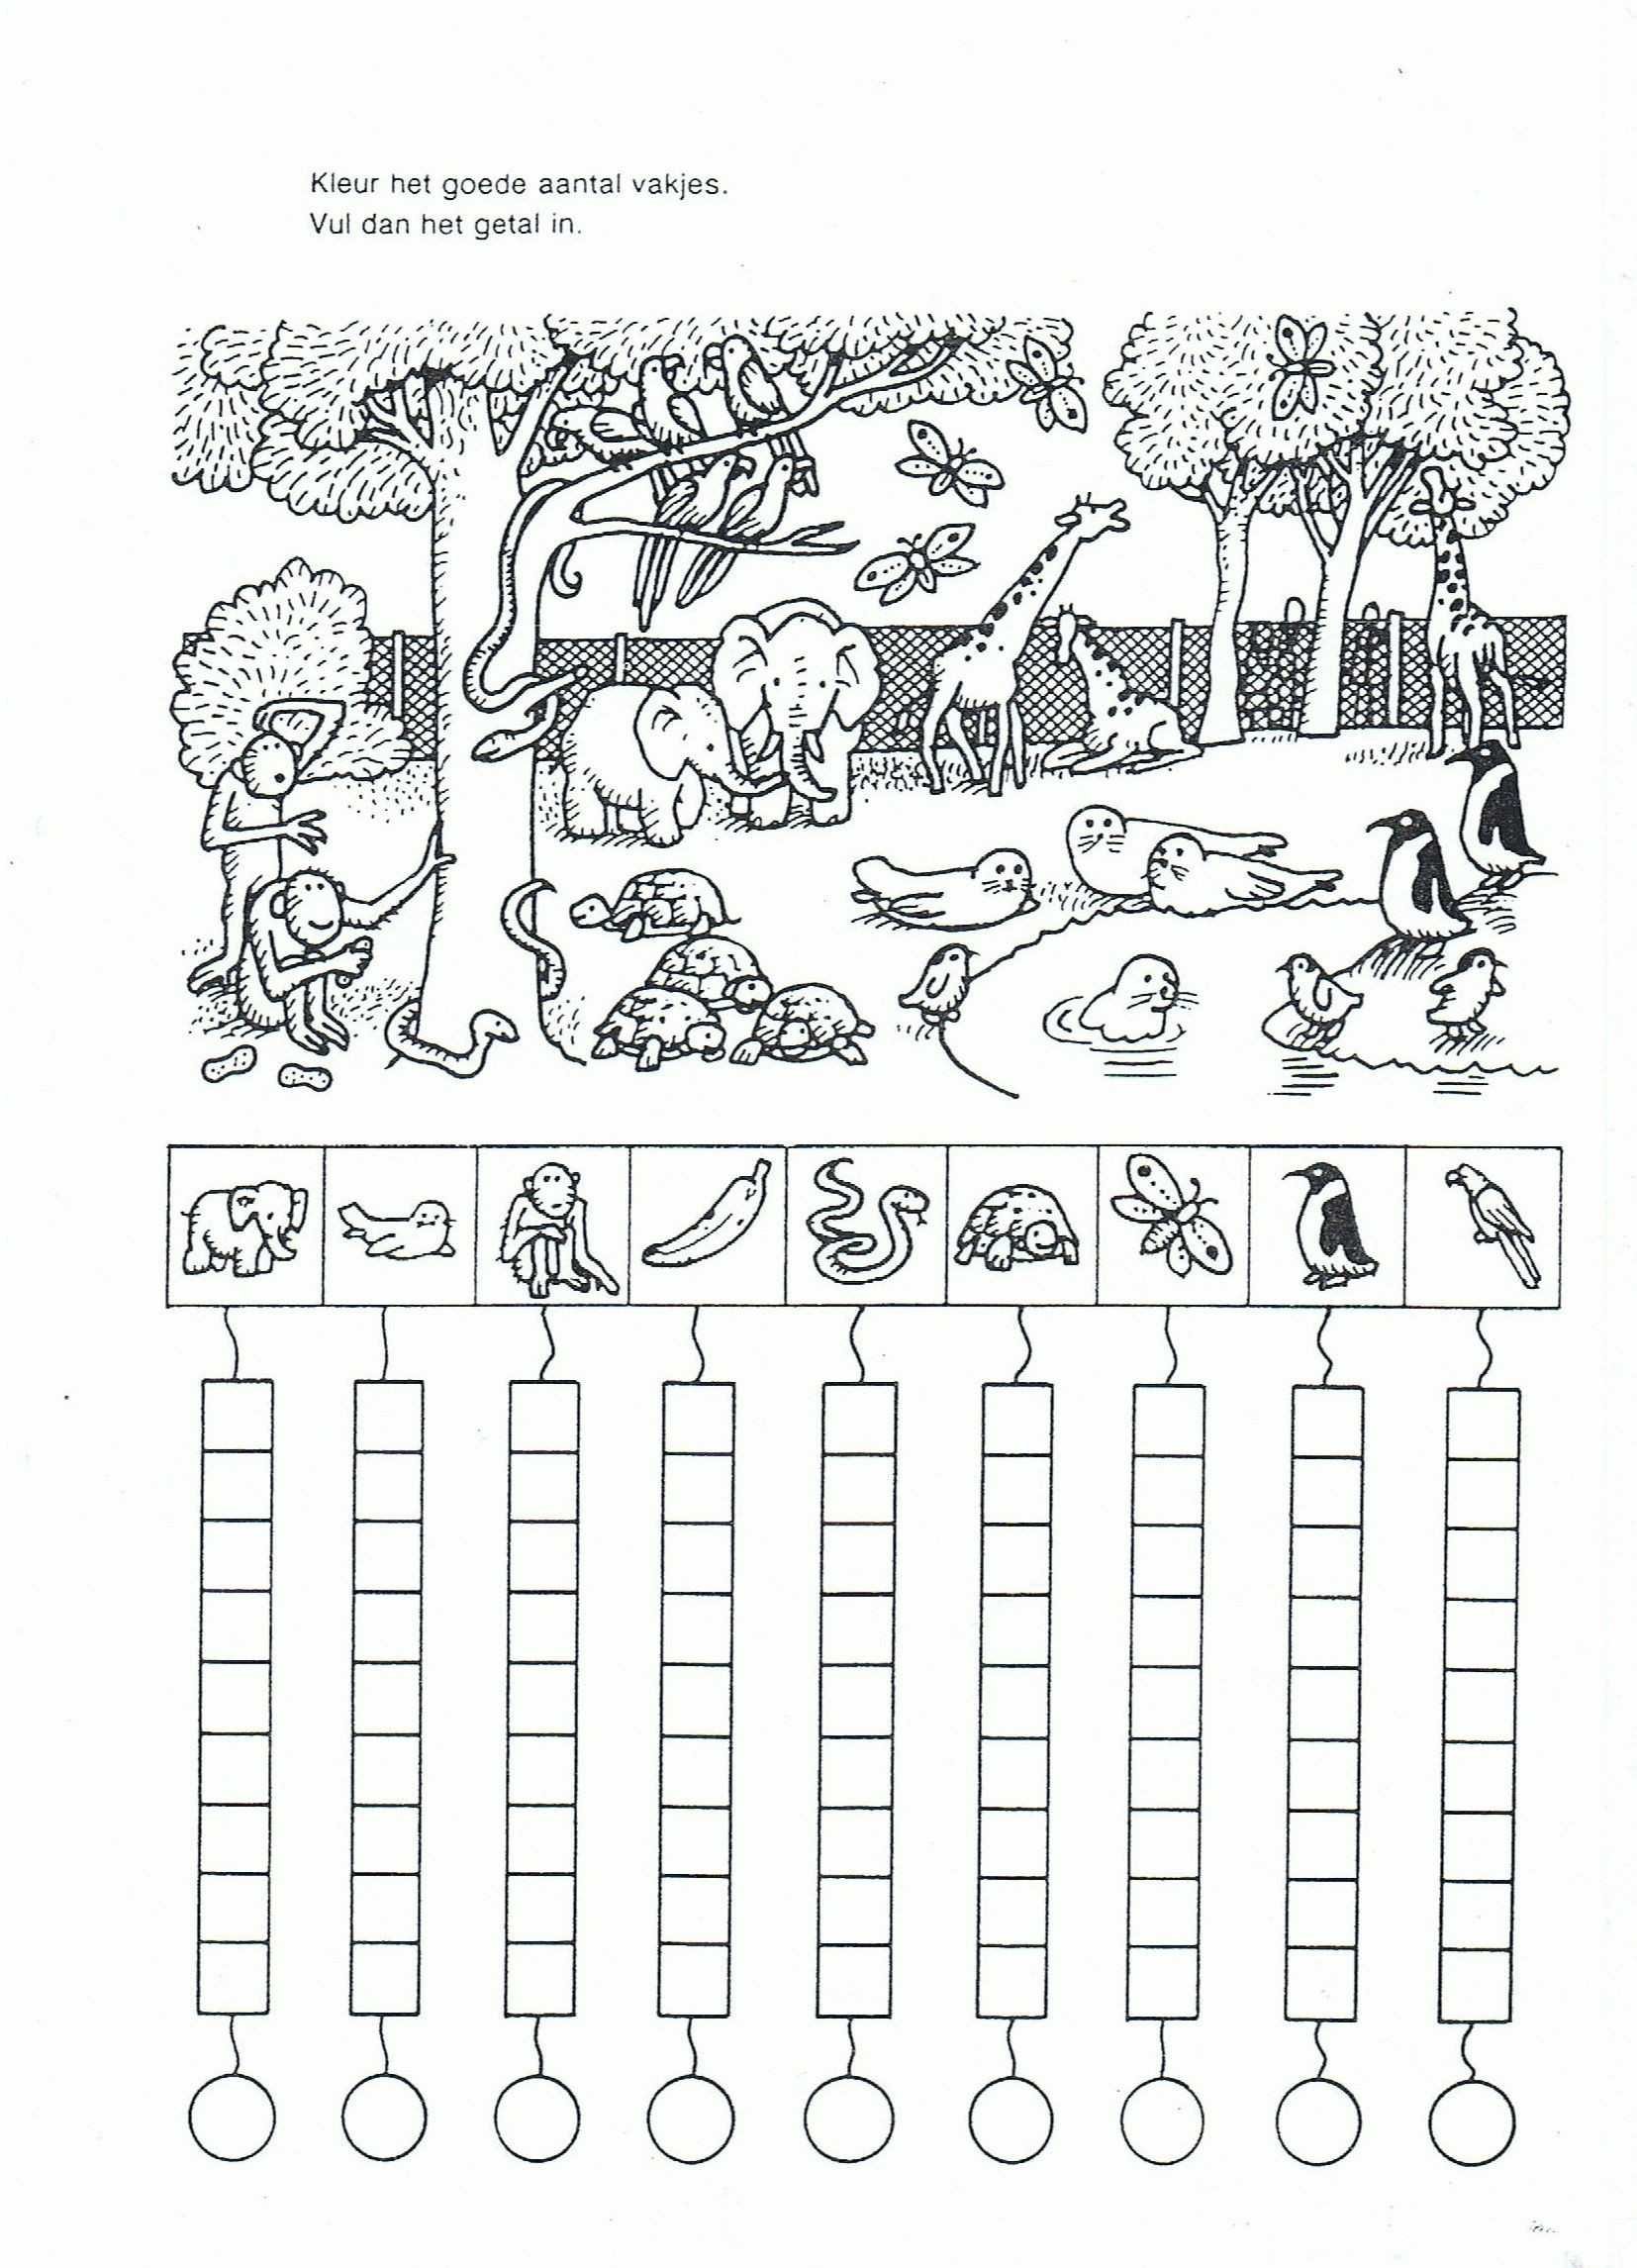 Growing Patterns Worksheets Along with Worksheets Templates Archives Page 7 Of 9 Parpadeo Co